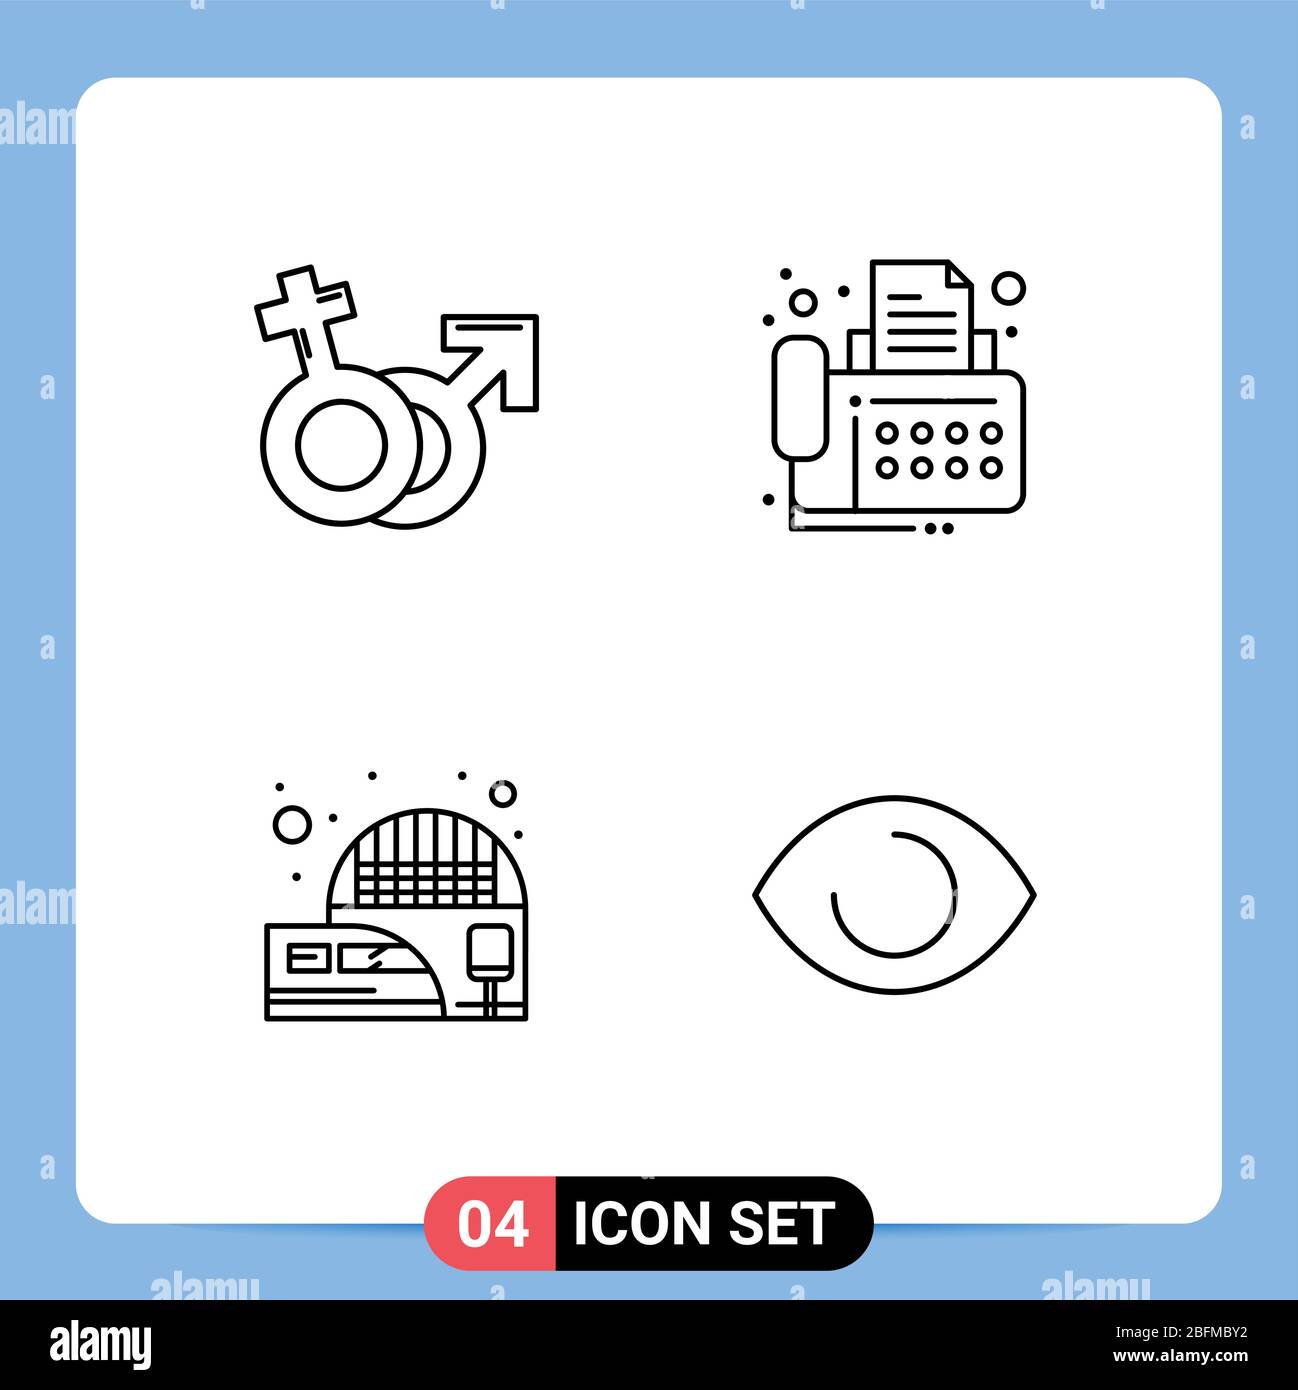 Group of 4 Filledline Flat Colors Signs and Symbols for gender, railway station, male, contact, suburban Editable Vector Design Elements Stock Vector